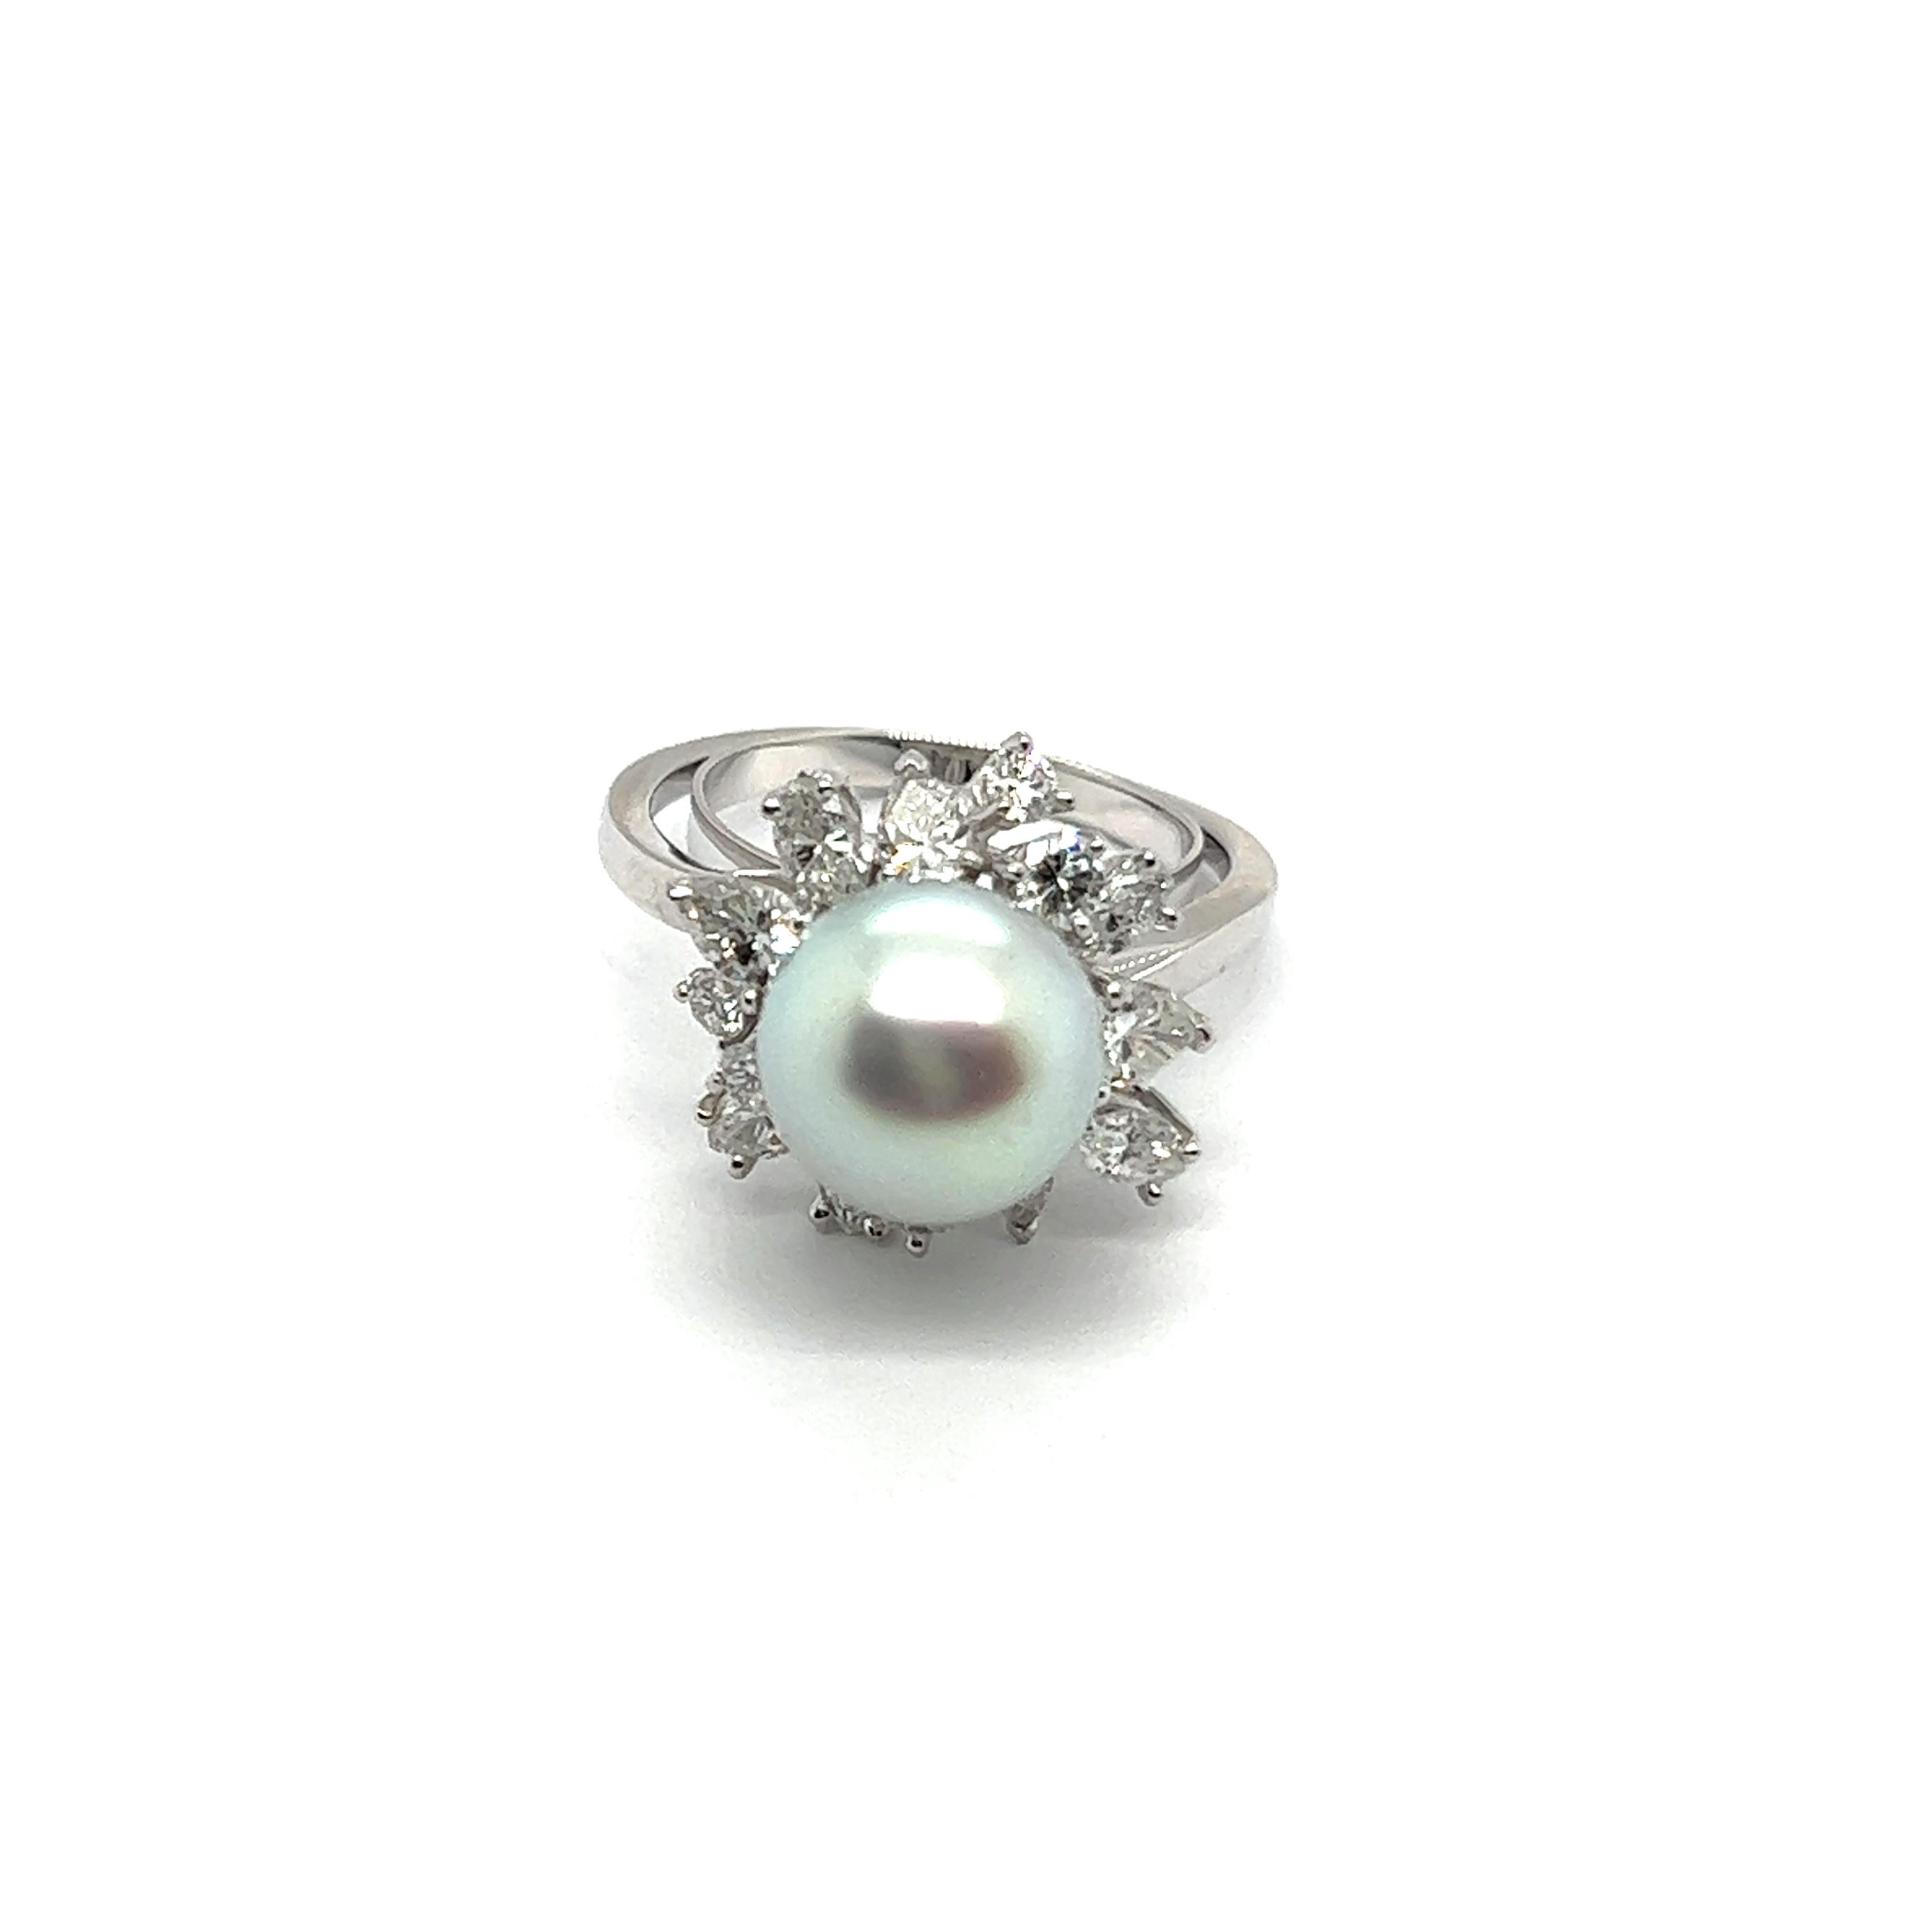 An exquisite ring with pearl and diamonds in 18 Karat white gold - an enchanting creation by Meister Jewelry. 

This piece features a captivating centerpiece - South Sea cultured pearl in beautiful silver hue. Surrounding the luminous pearl are 5